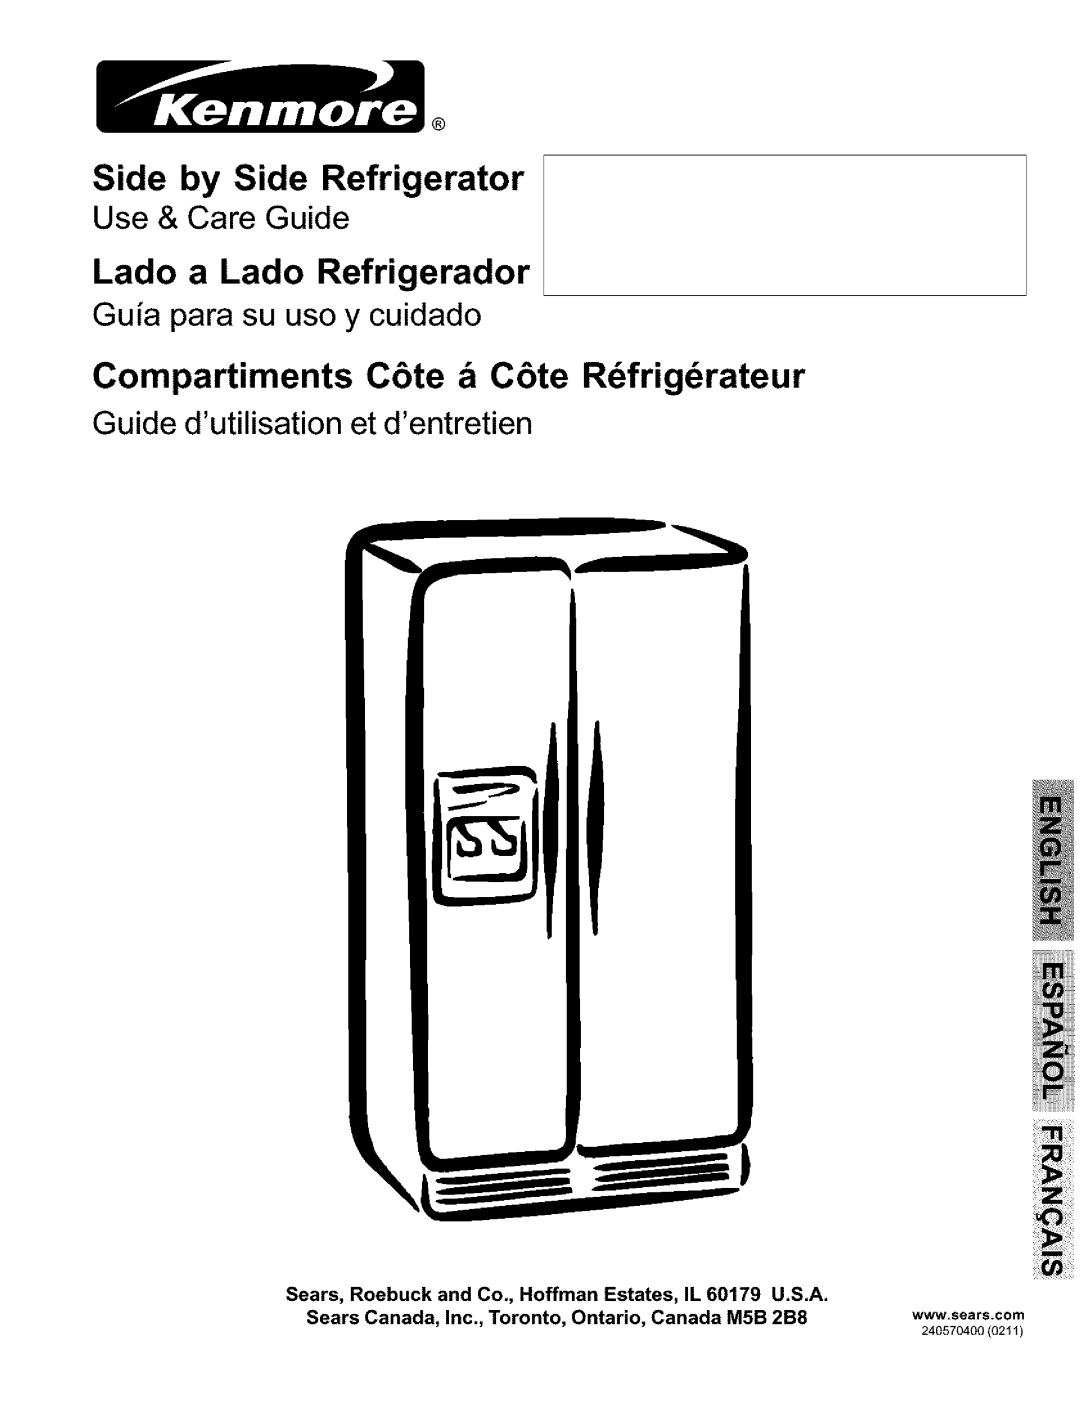 Kenmore 25354703404 manual Sears, Roebuck and Co, Hoffman Estates, IL, U.S.A, Side by Side Refrigerator, Use & Care Guide 